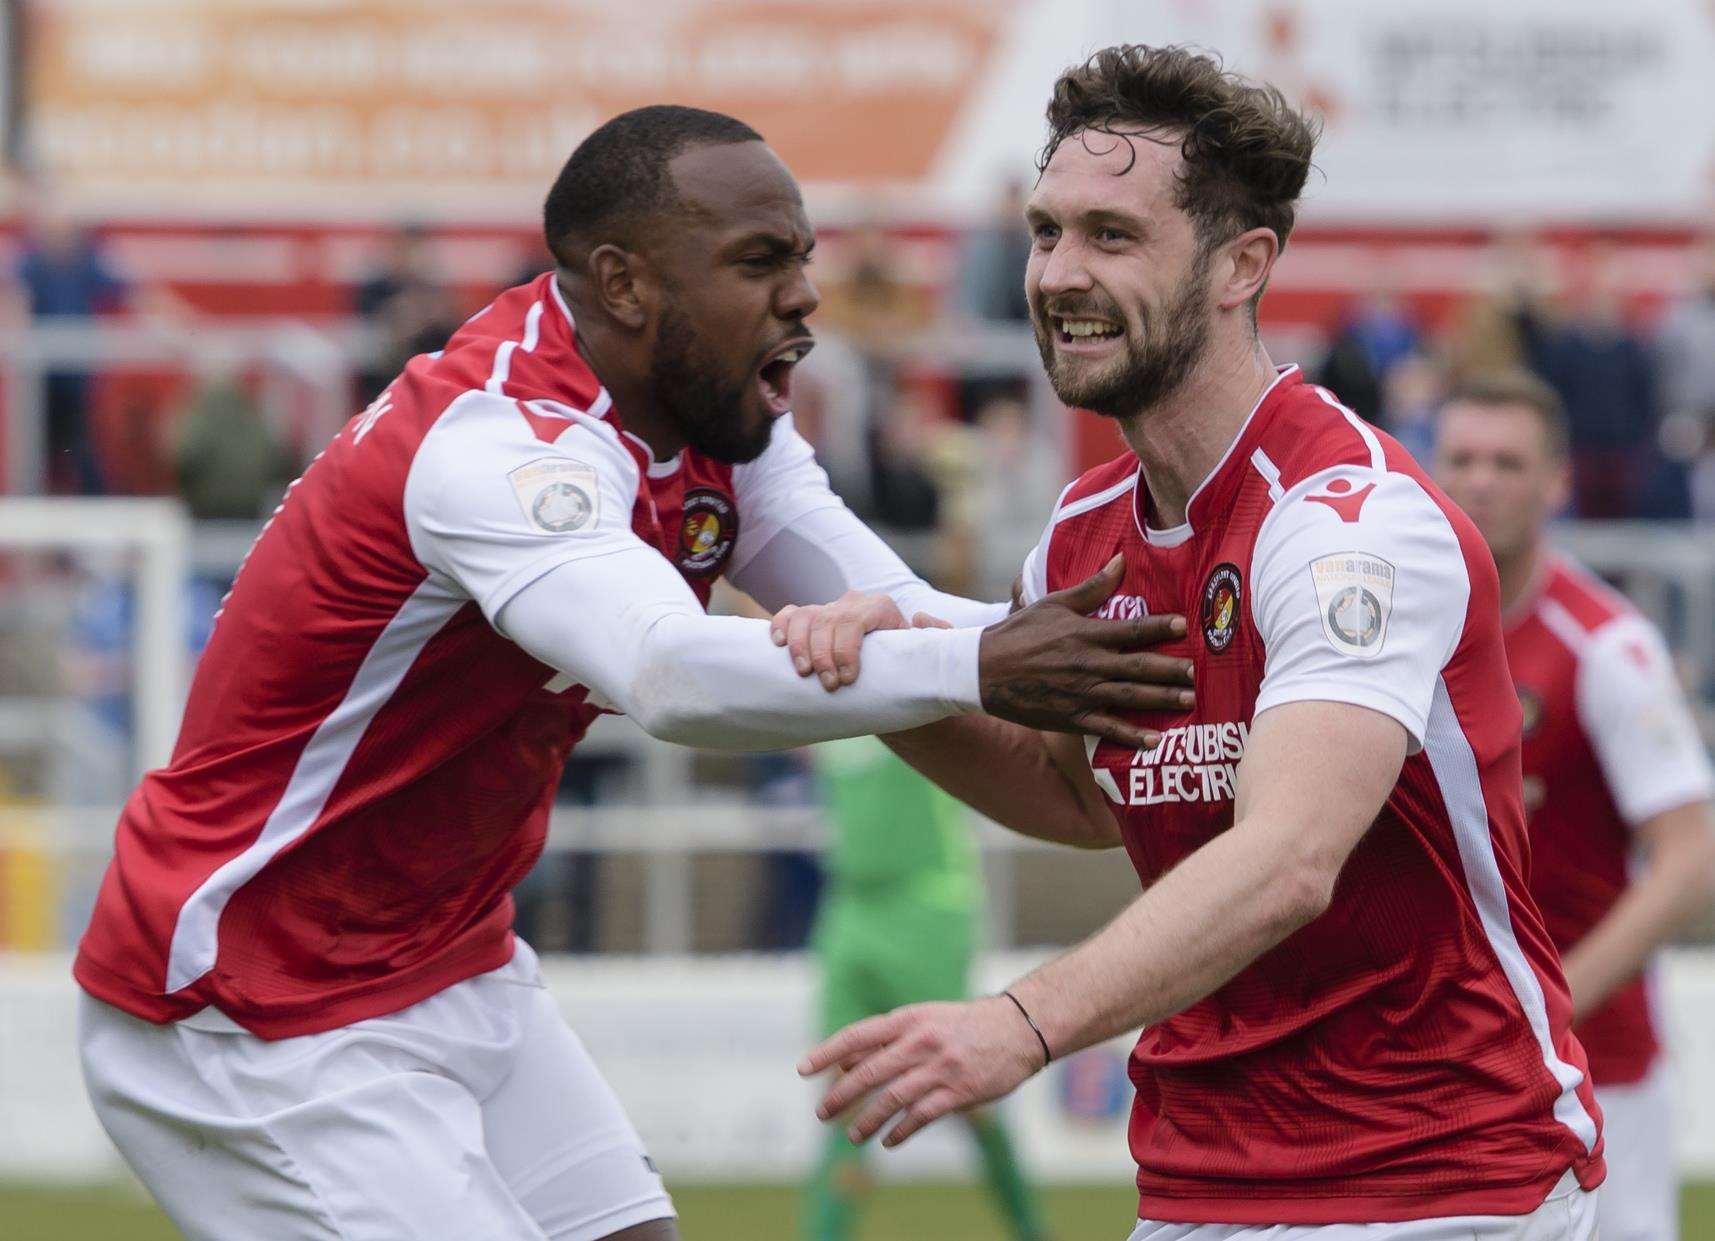 Dean Rance celebrates scoring the equaliser for Ebbsfleet. Picture: Andy Payton